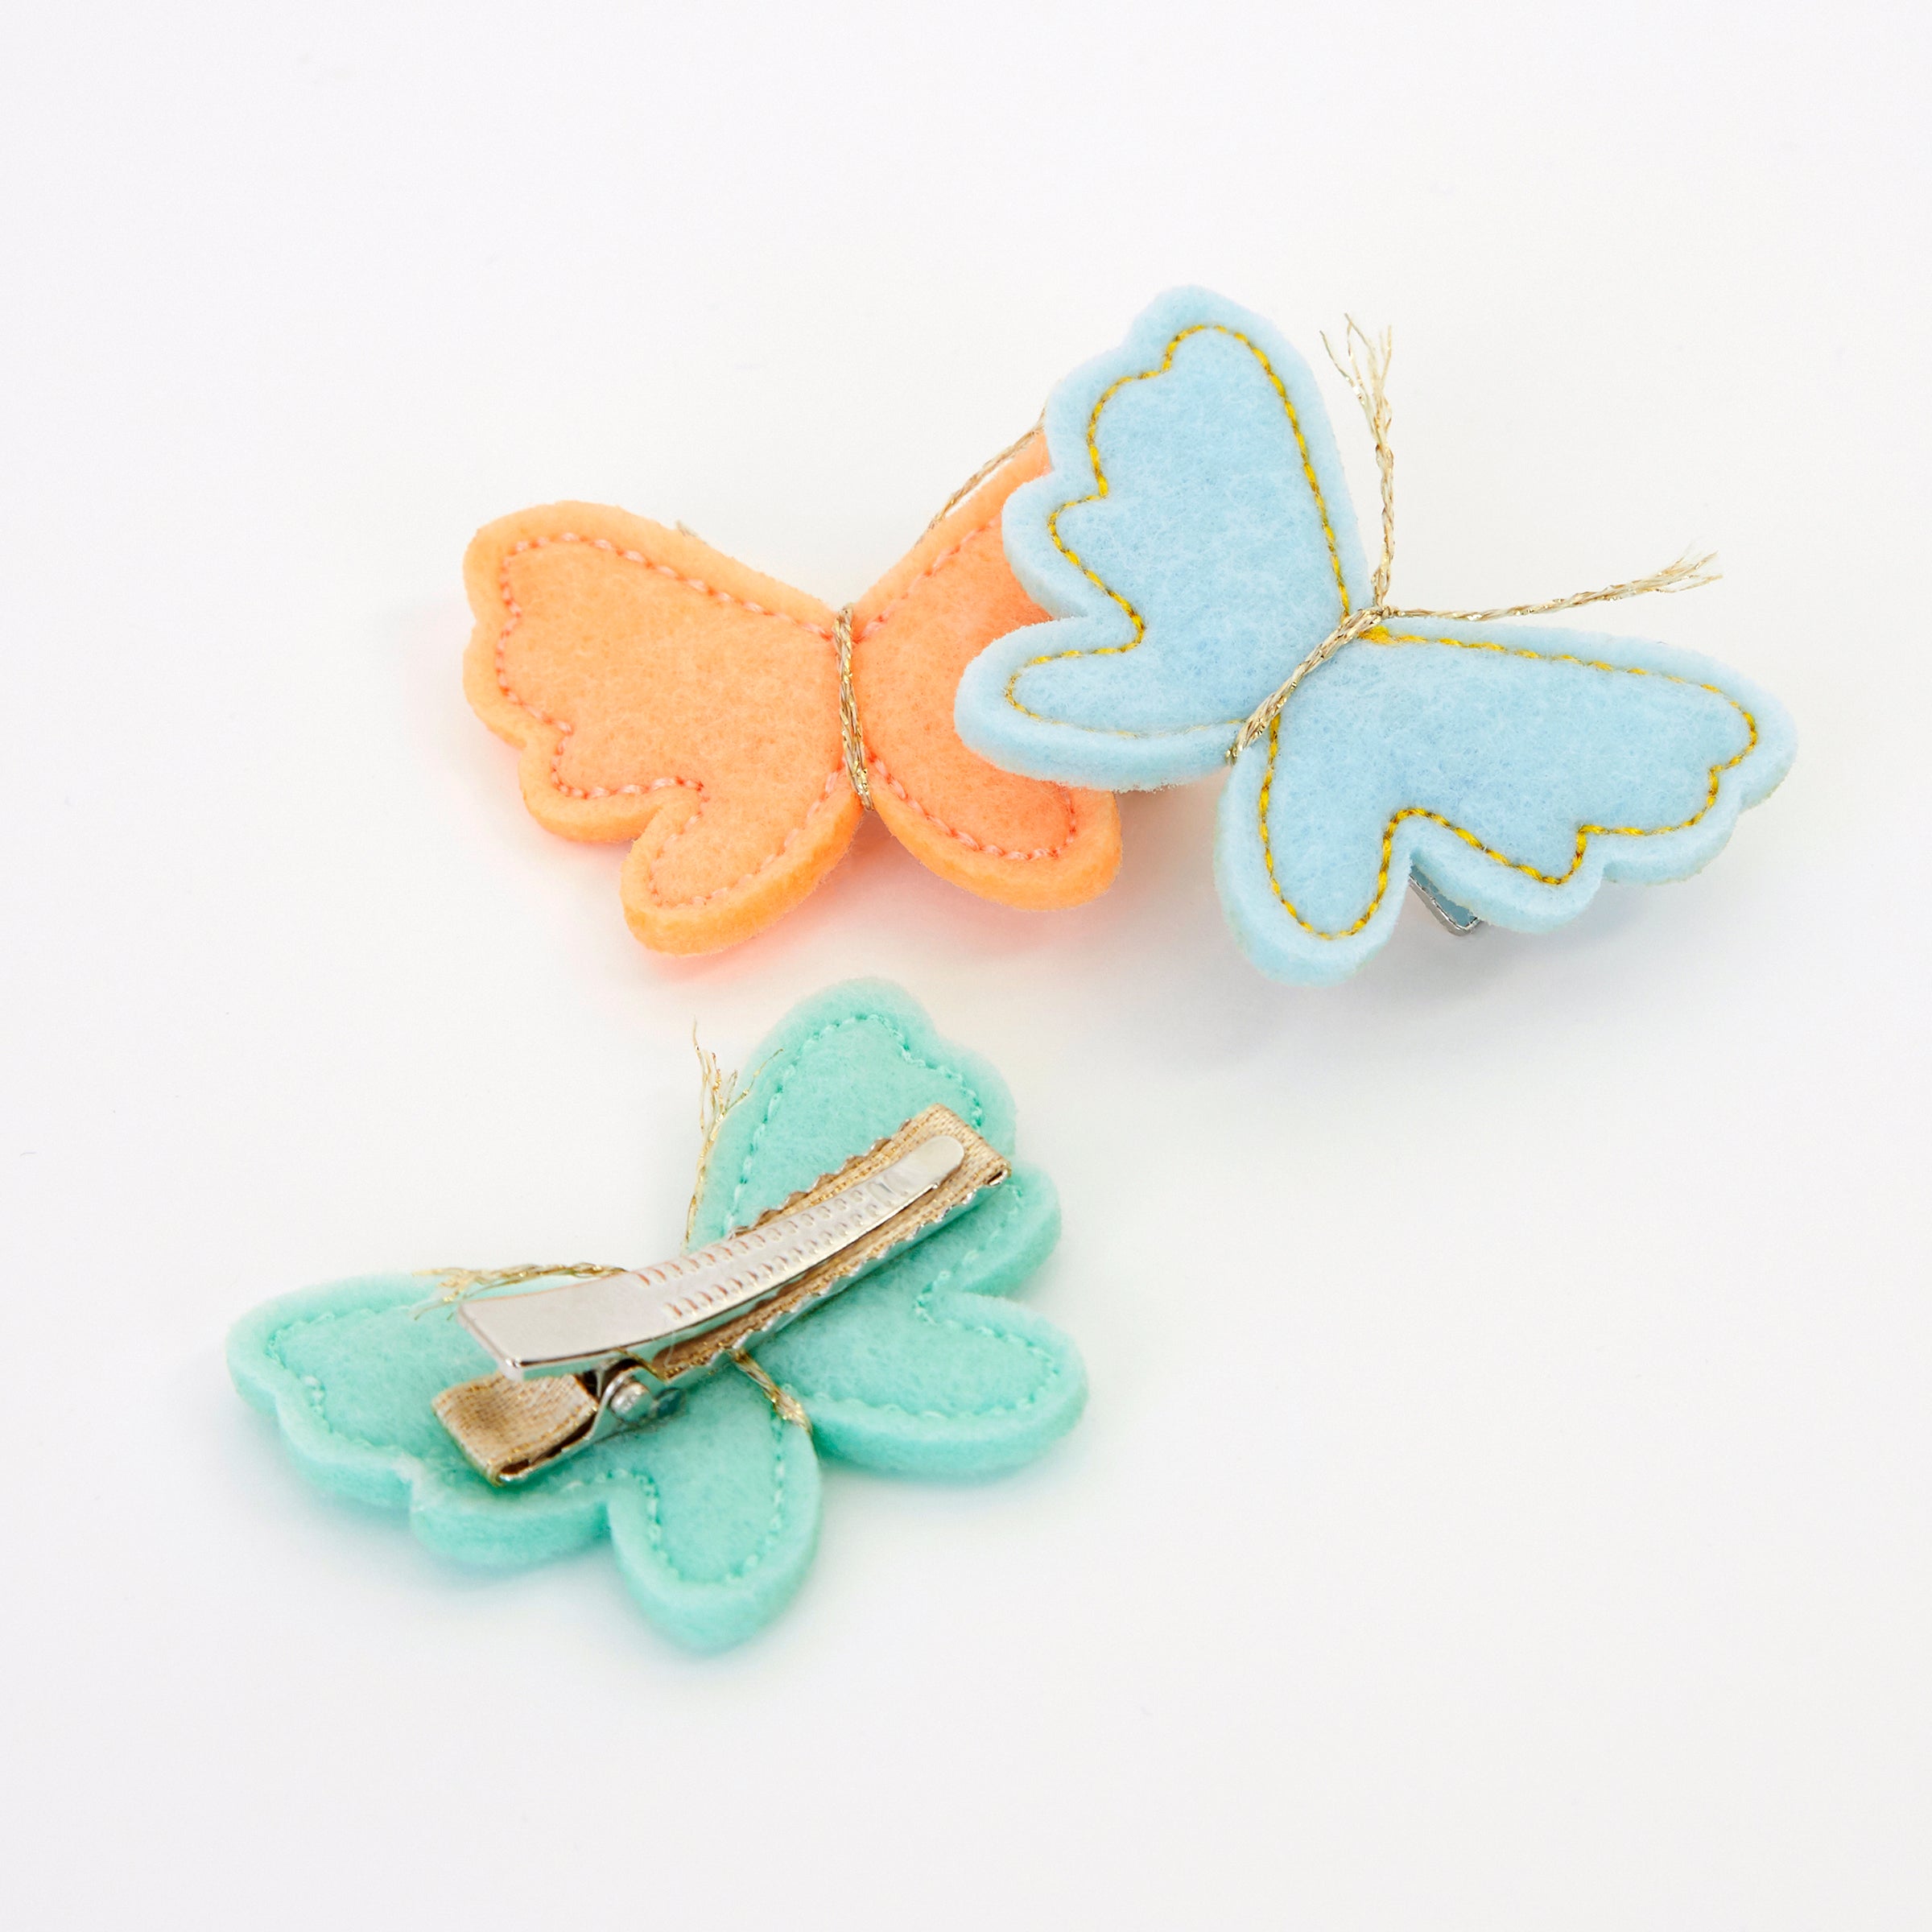 Our butterfly hair accessories are beautifully crafted from colorful felt with sweet metallic gold antennae.